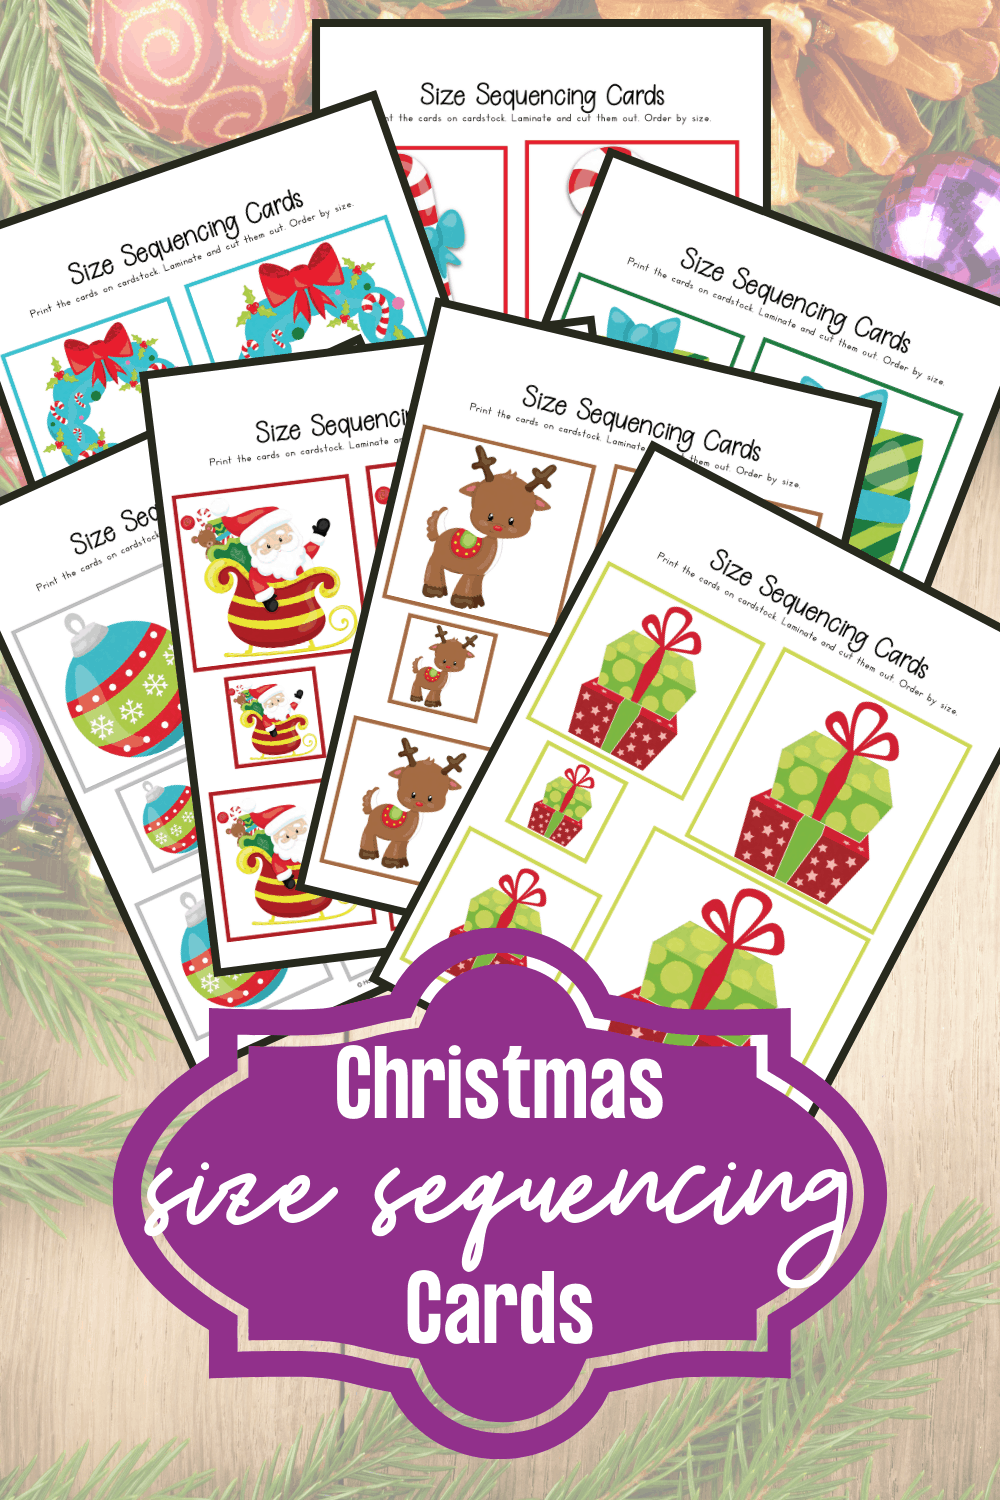 cmas-size-seq-1 Christmas Size Sequencing Cards for Preschool